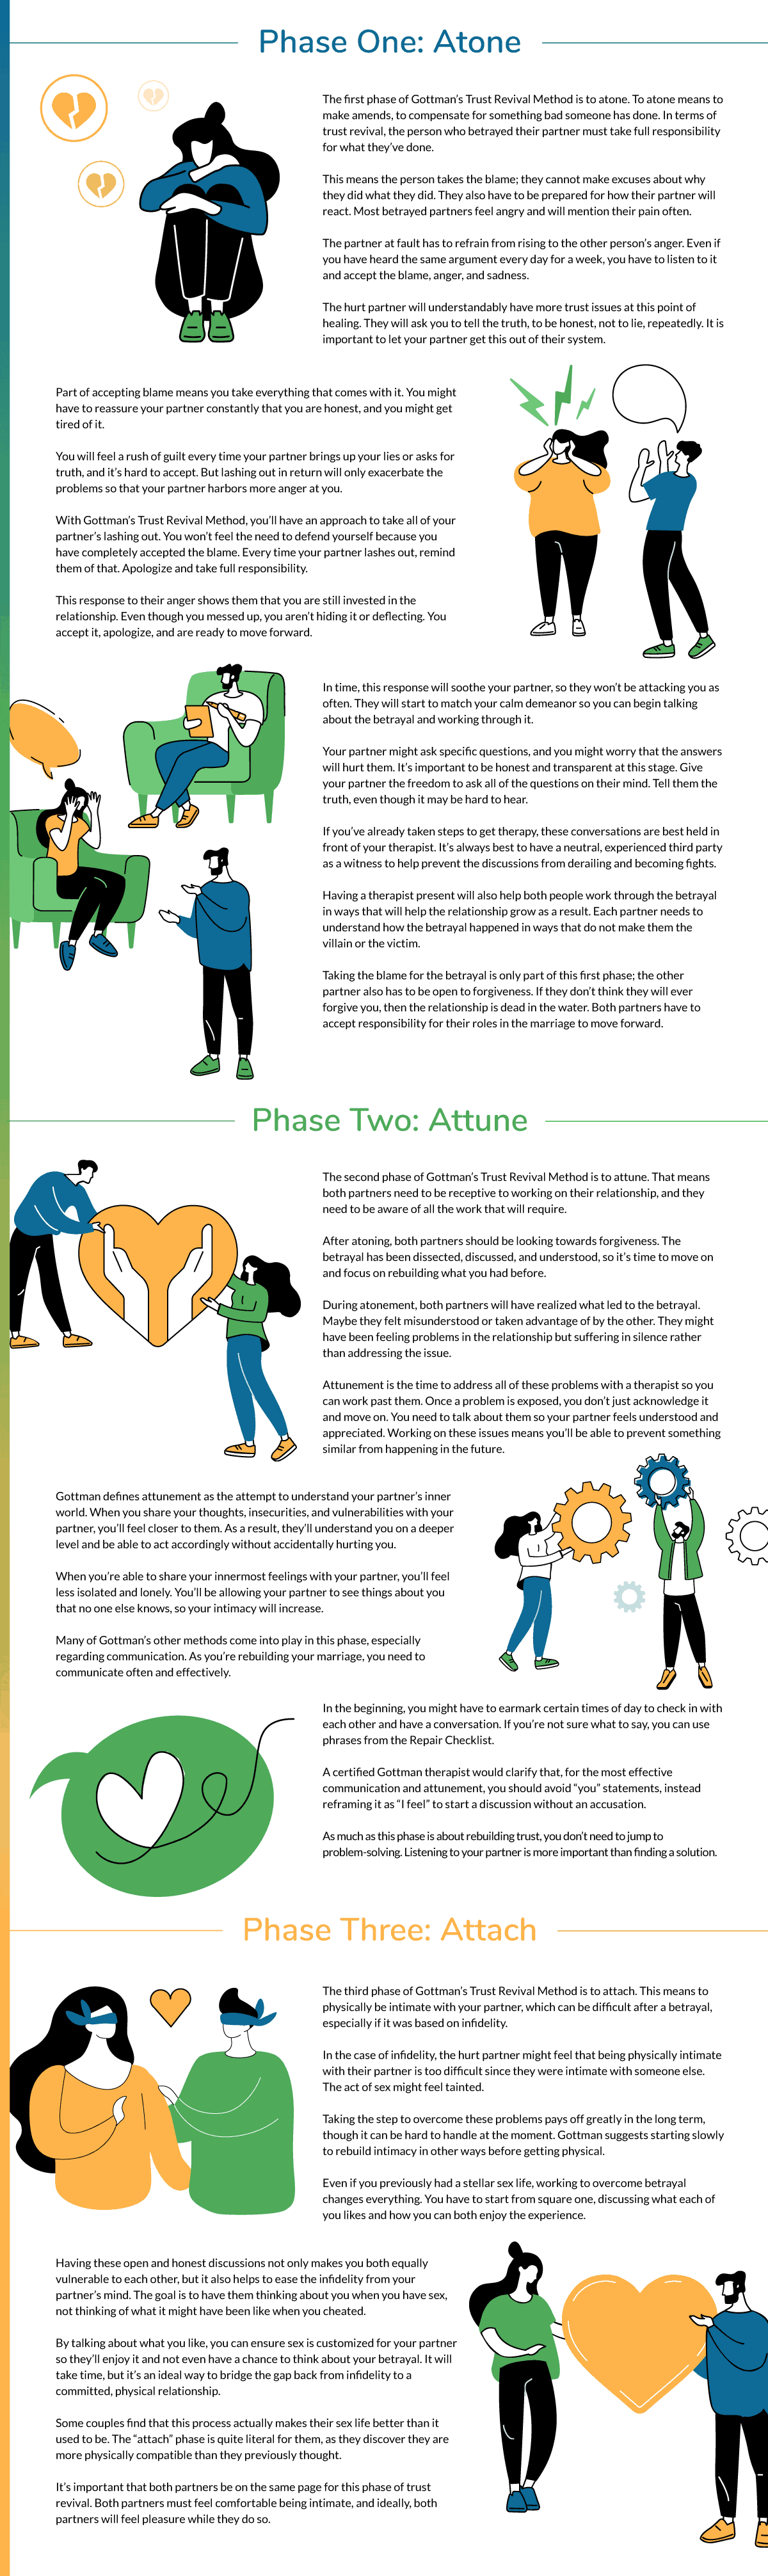 Three Phases of Trust Revival